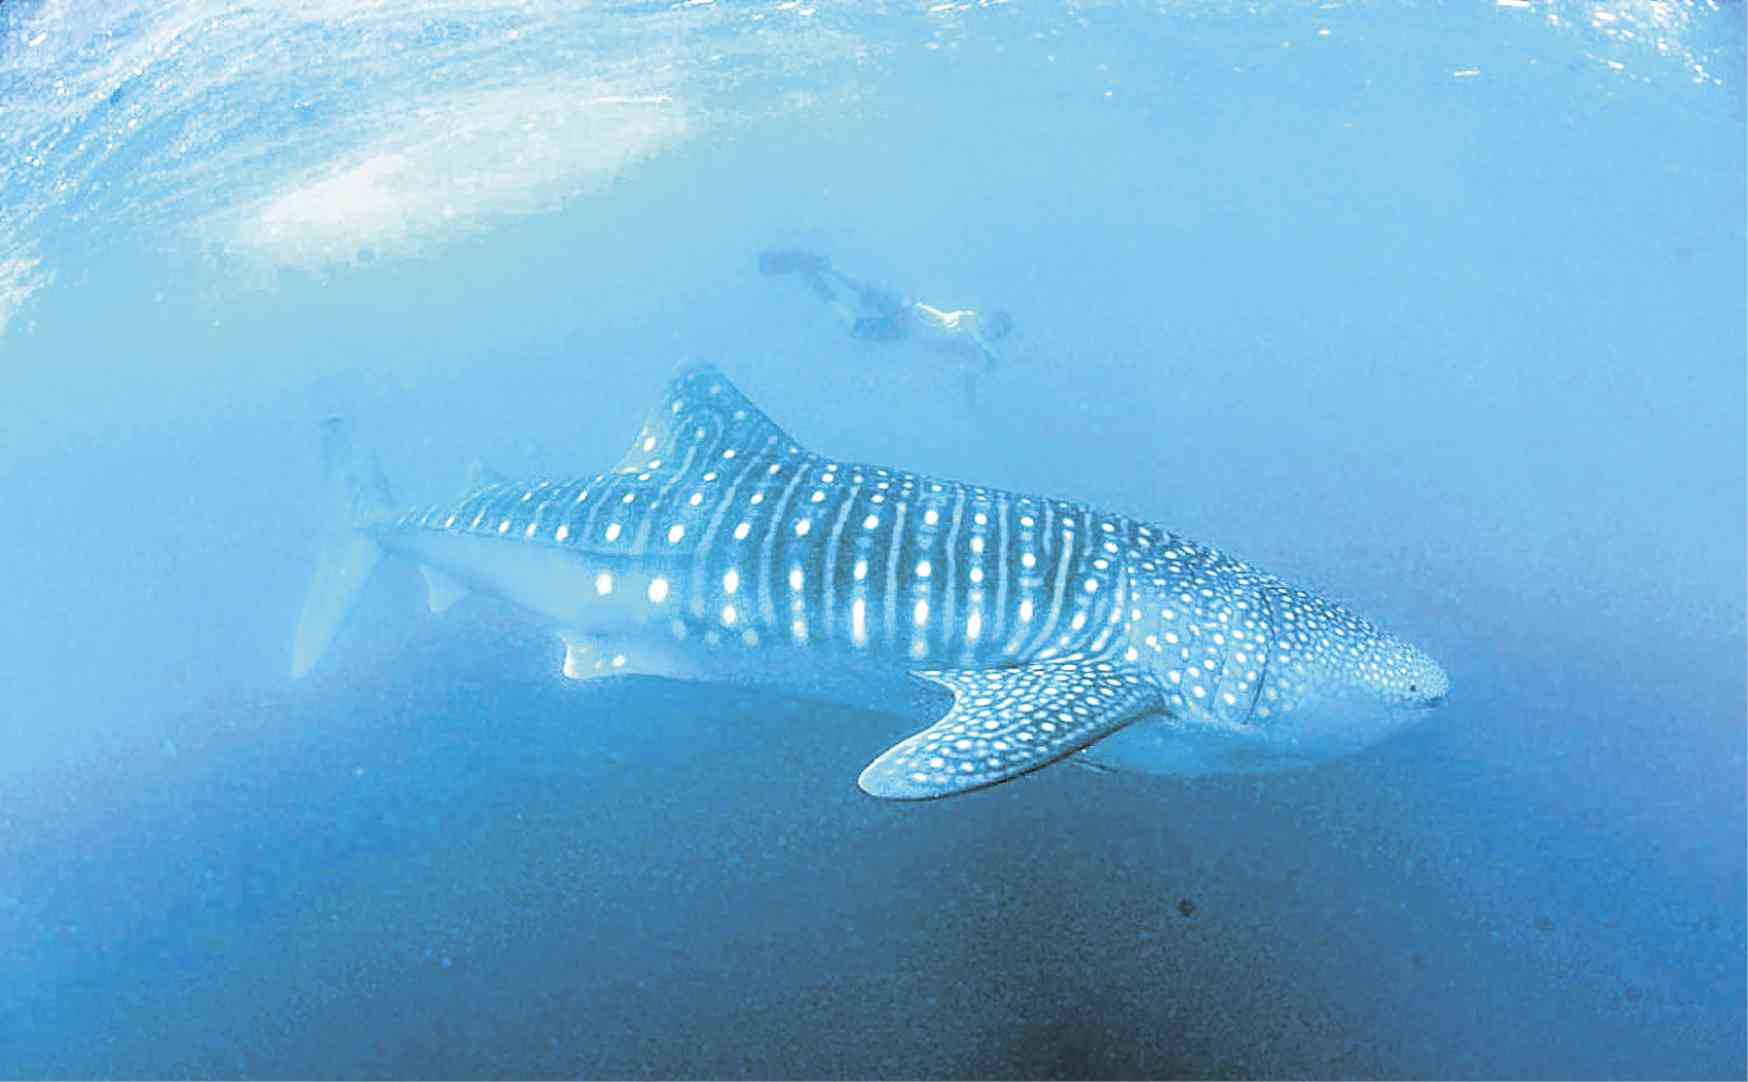 104 whale sharks seen for first time in Donsol